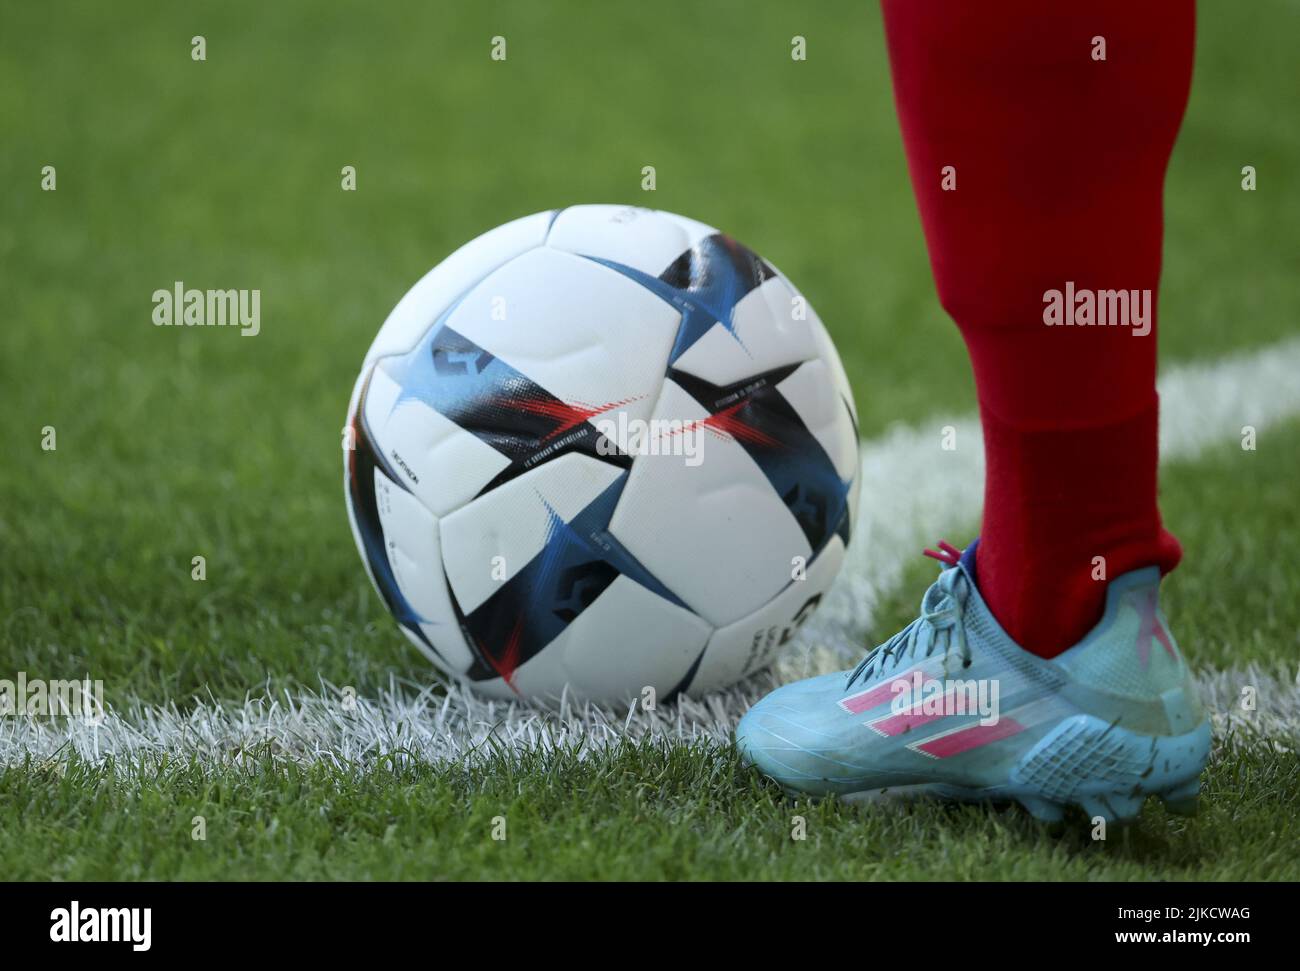 Kipsta by Decathlon matchball during the pre-season friendly football match  between Stade de Reims and US Sassuolo Calcio on July 31, 2022 at Stade  Auguste Delaune in Reims, France - Photo: Jean